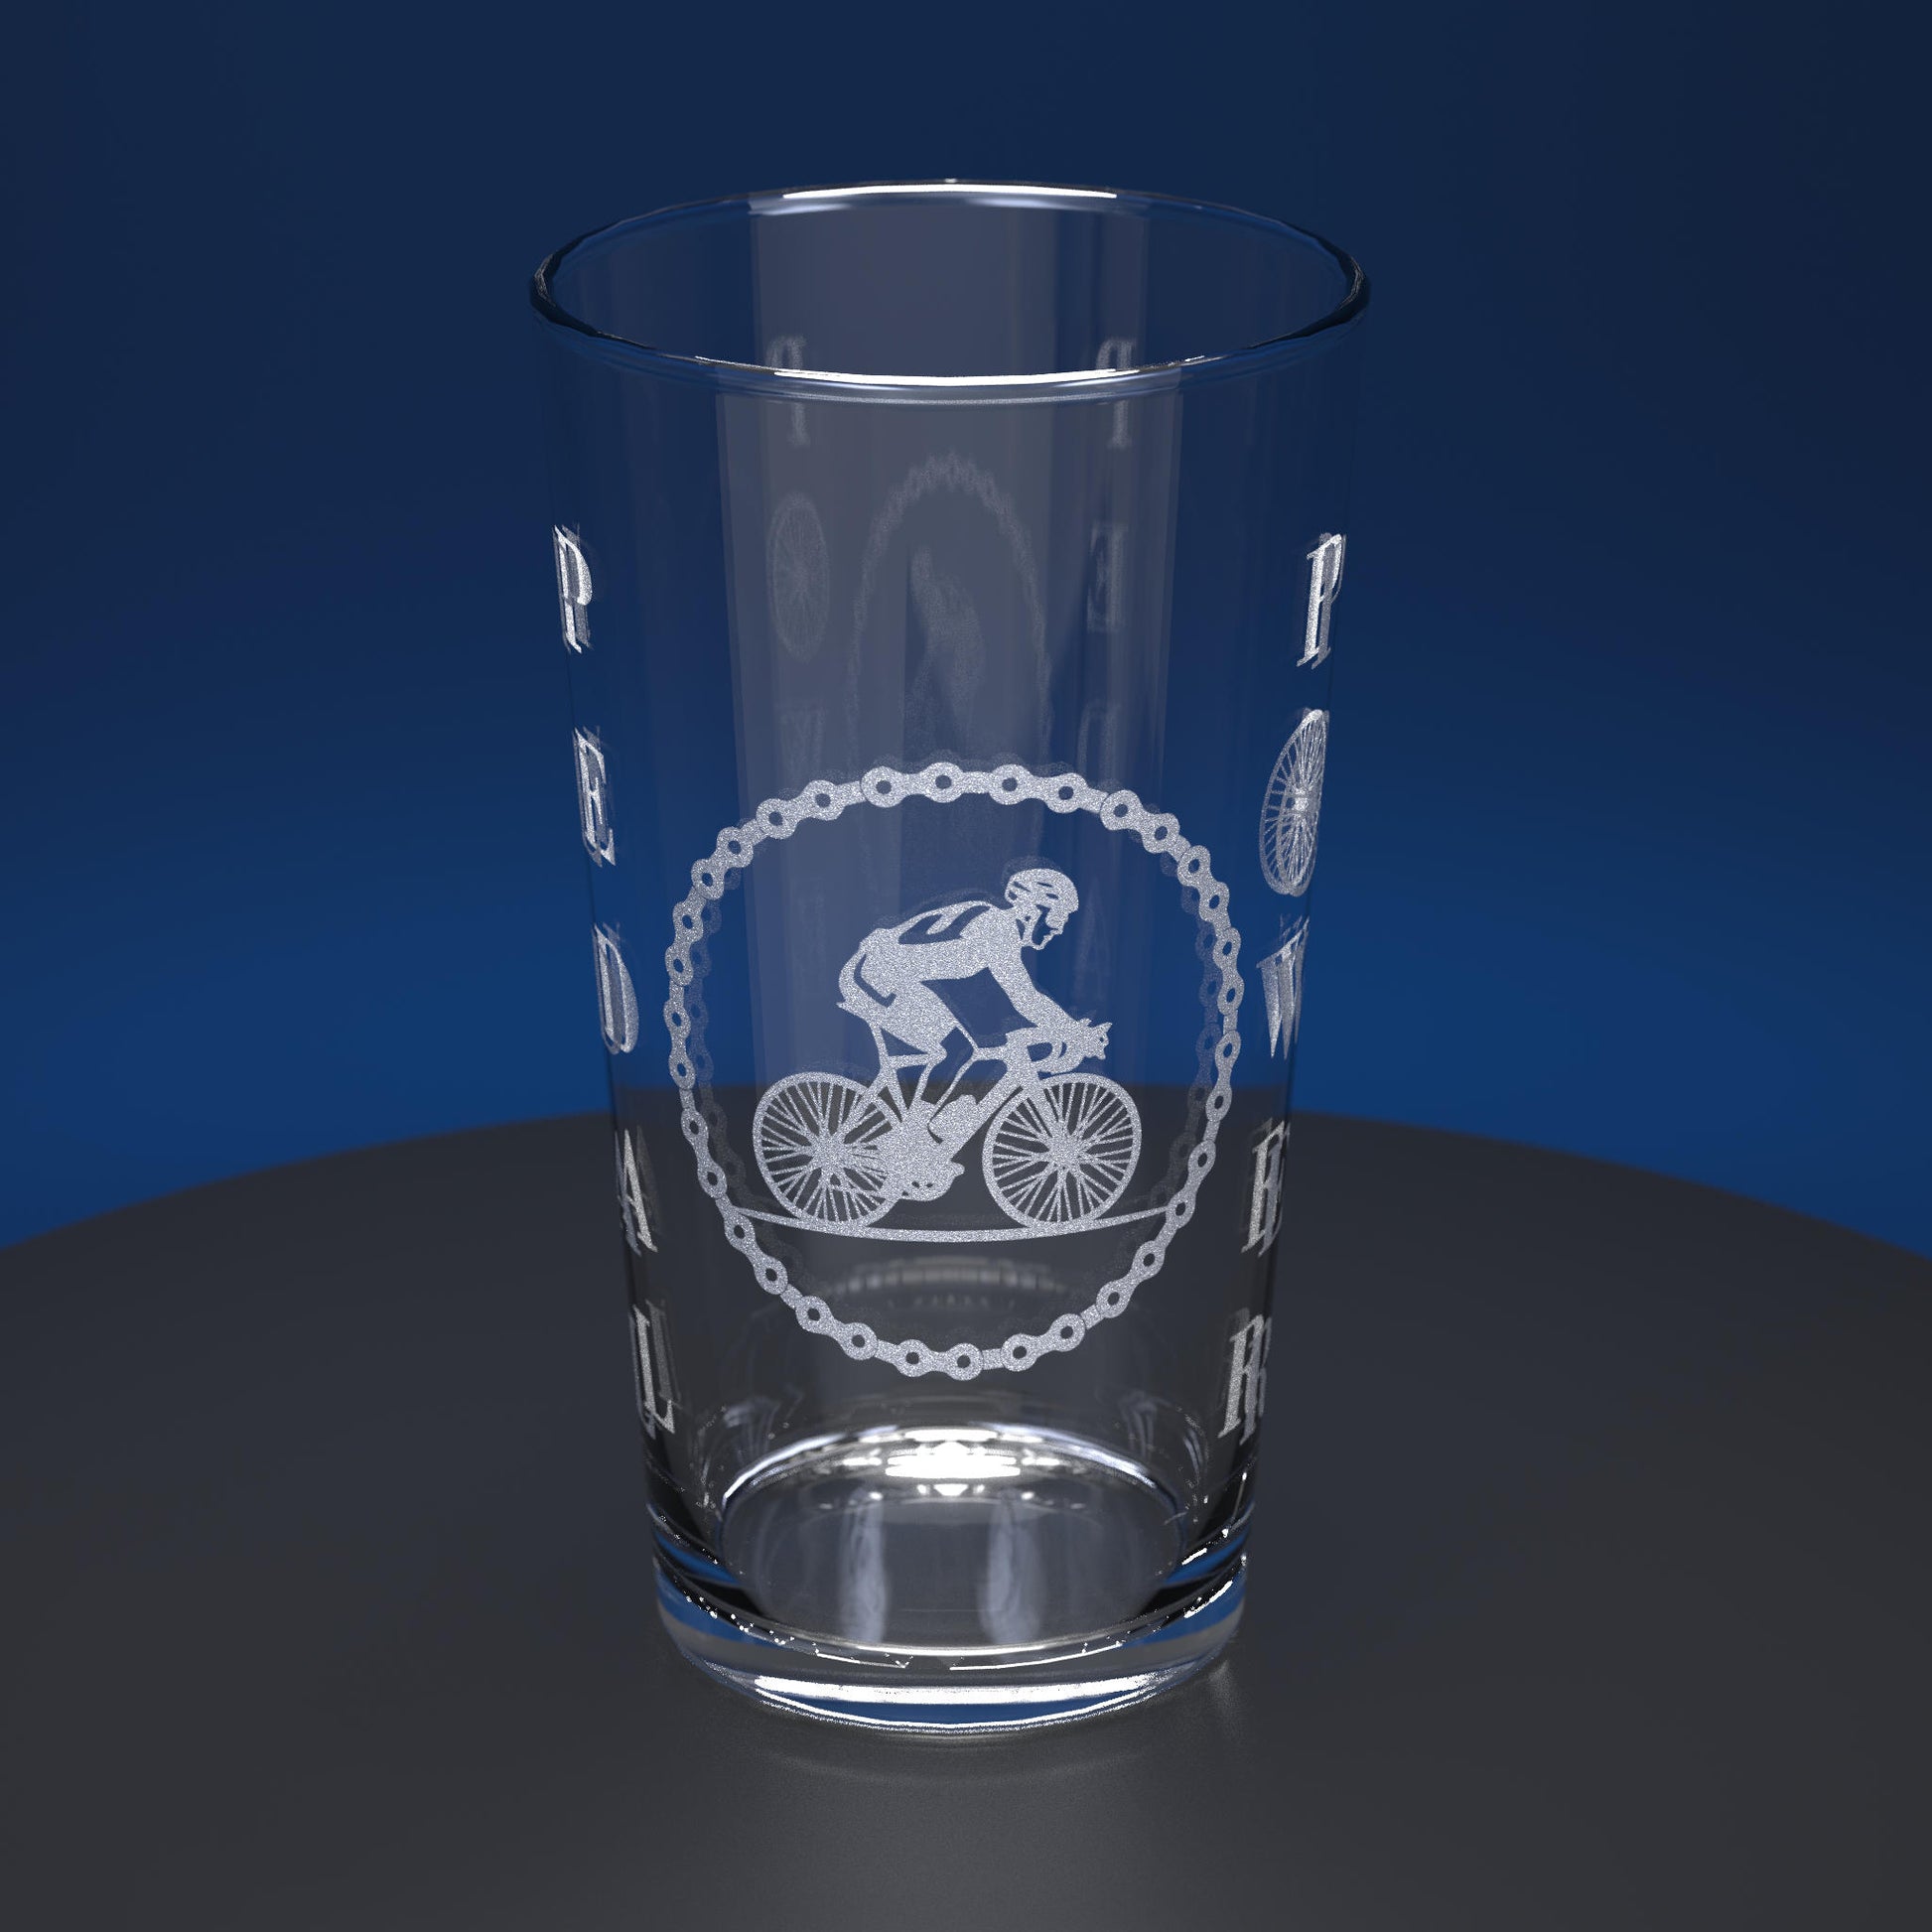 Pint glass engraved with cyclist and Pedal Power text